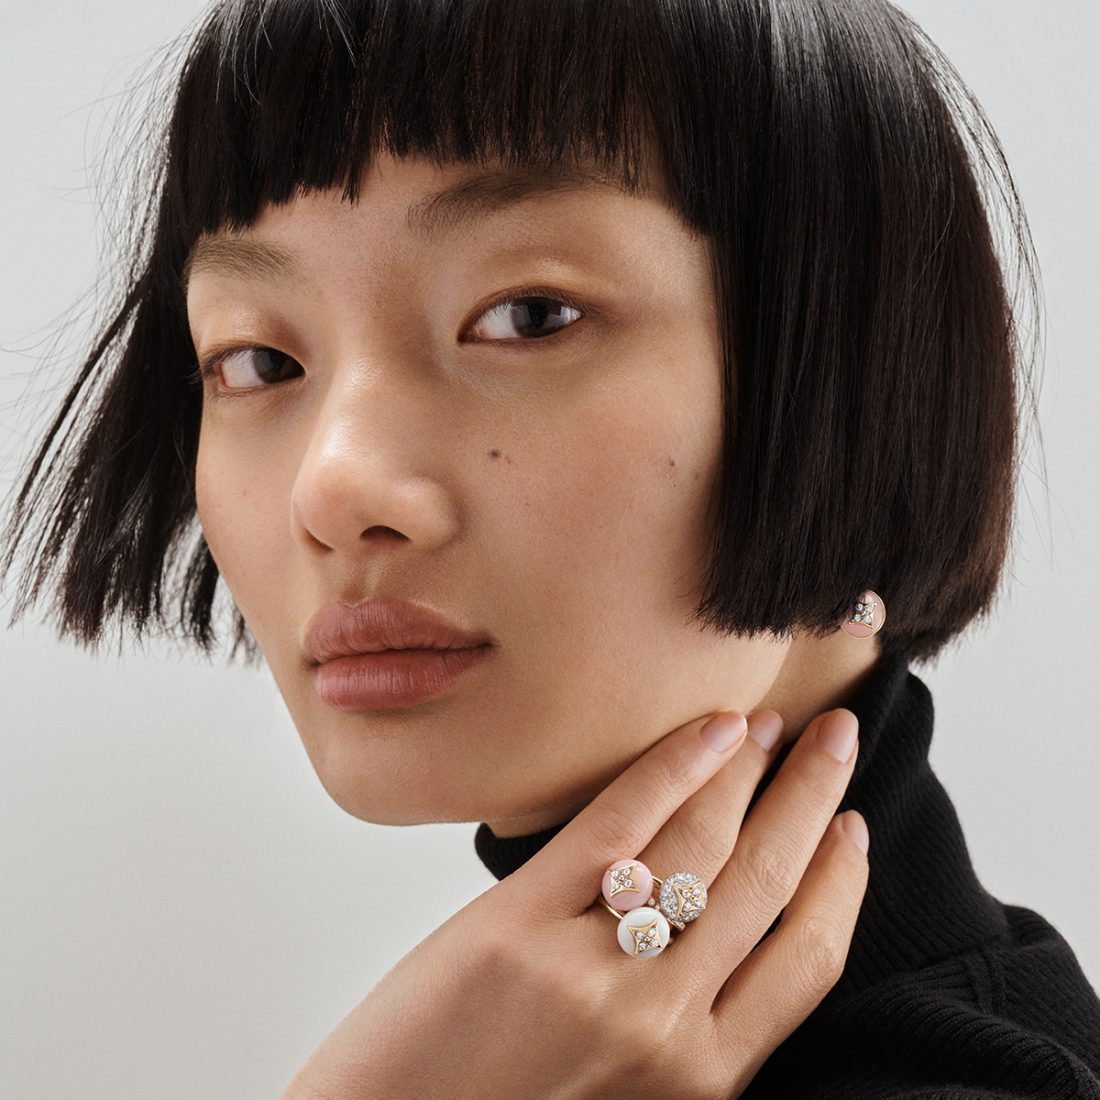 Louis Vuitton presents its new B Blossom fine jewellery launches in Harbour  City – Harbour City